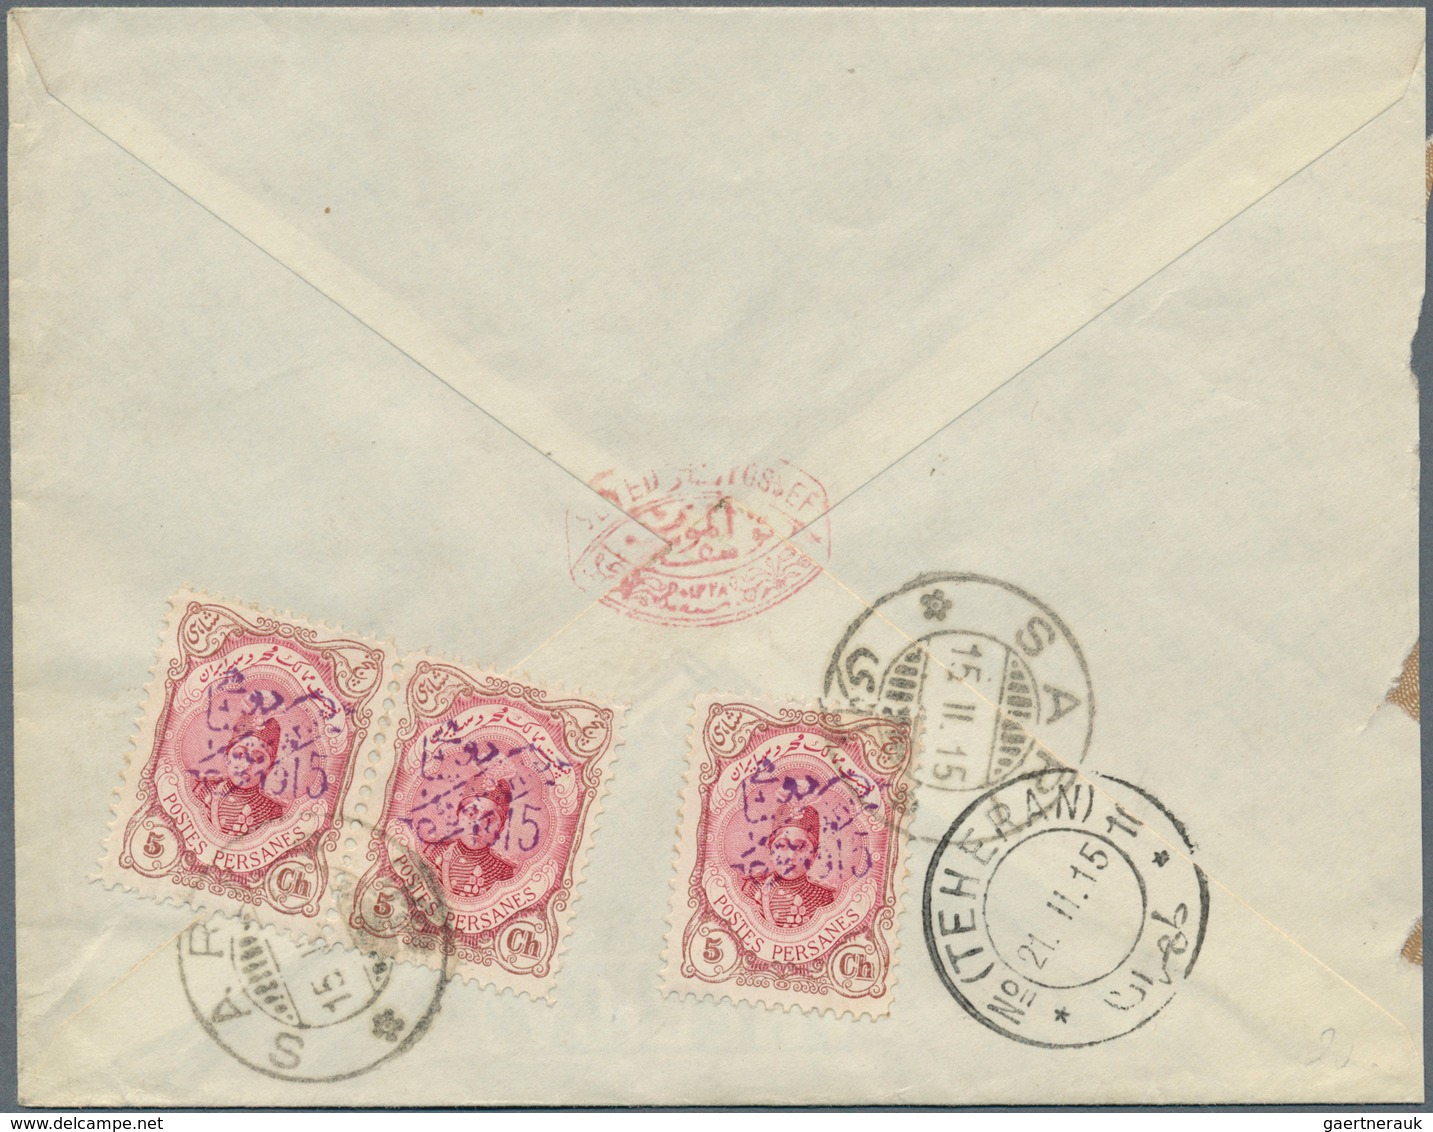 22810 Iran: 1880-1925, Collection of 160 covers / stationerys from classics to modern with many different